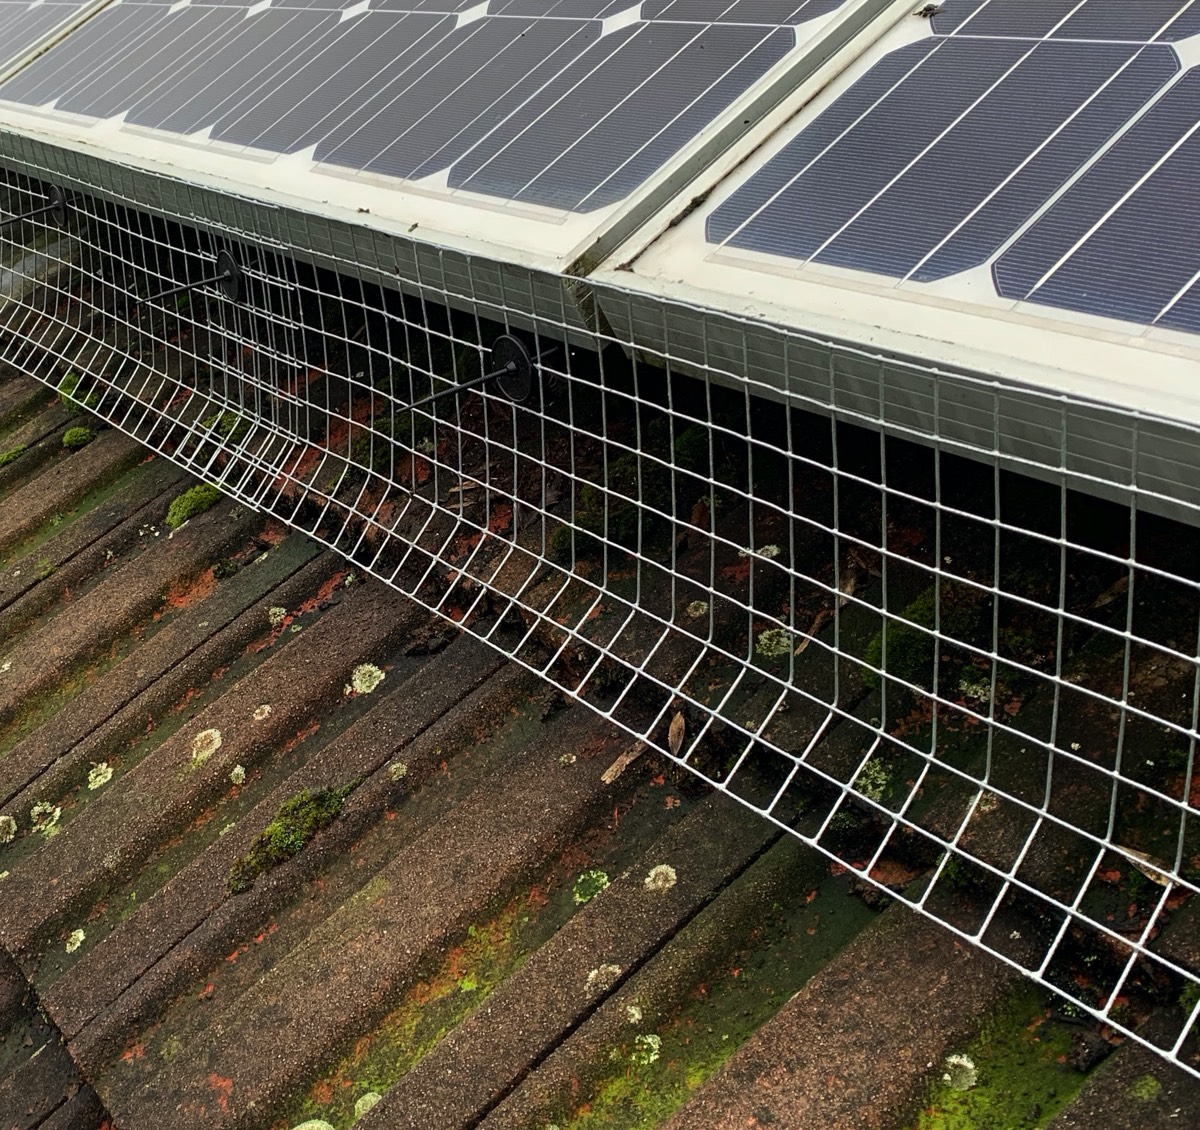 No holes are made in the panels, so the solar panel warranties are not invalidated.